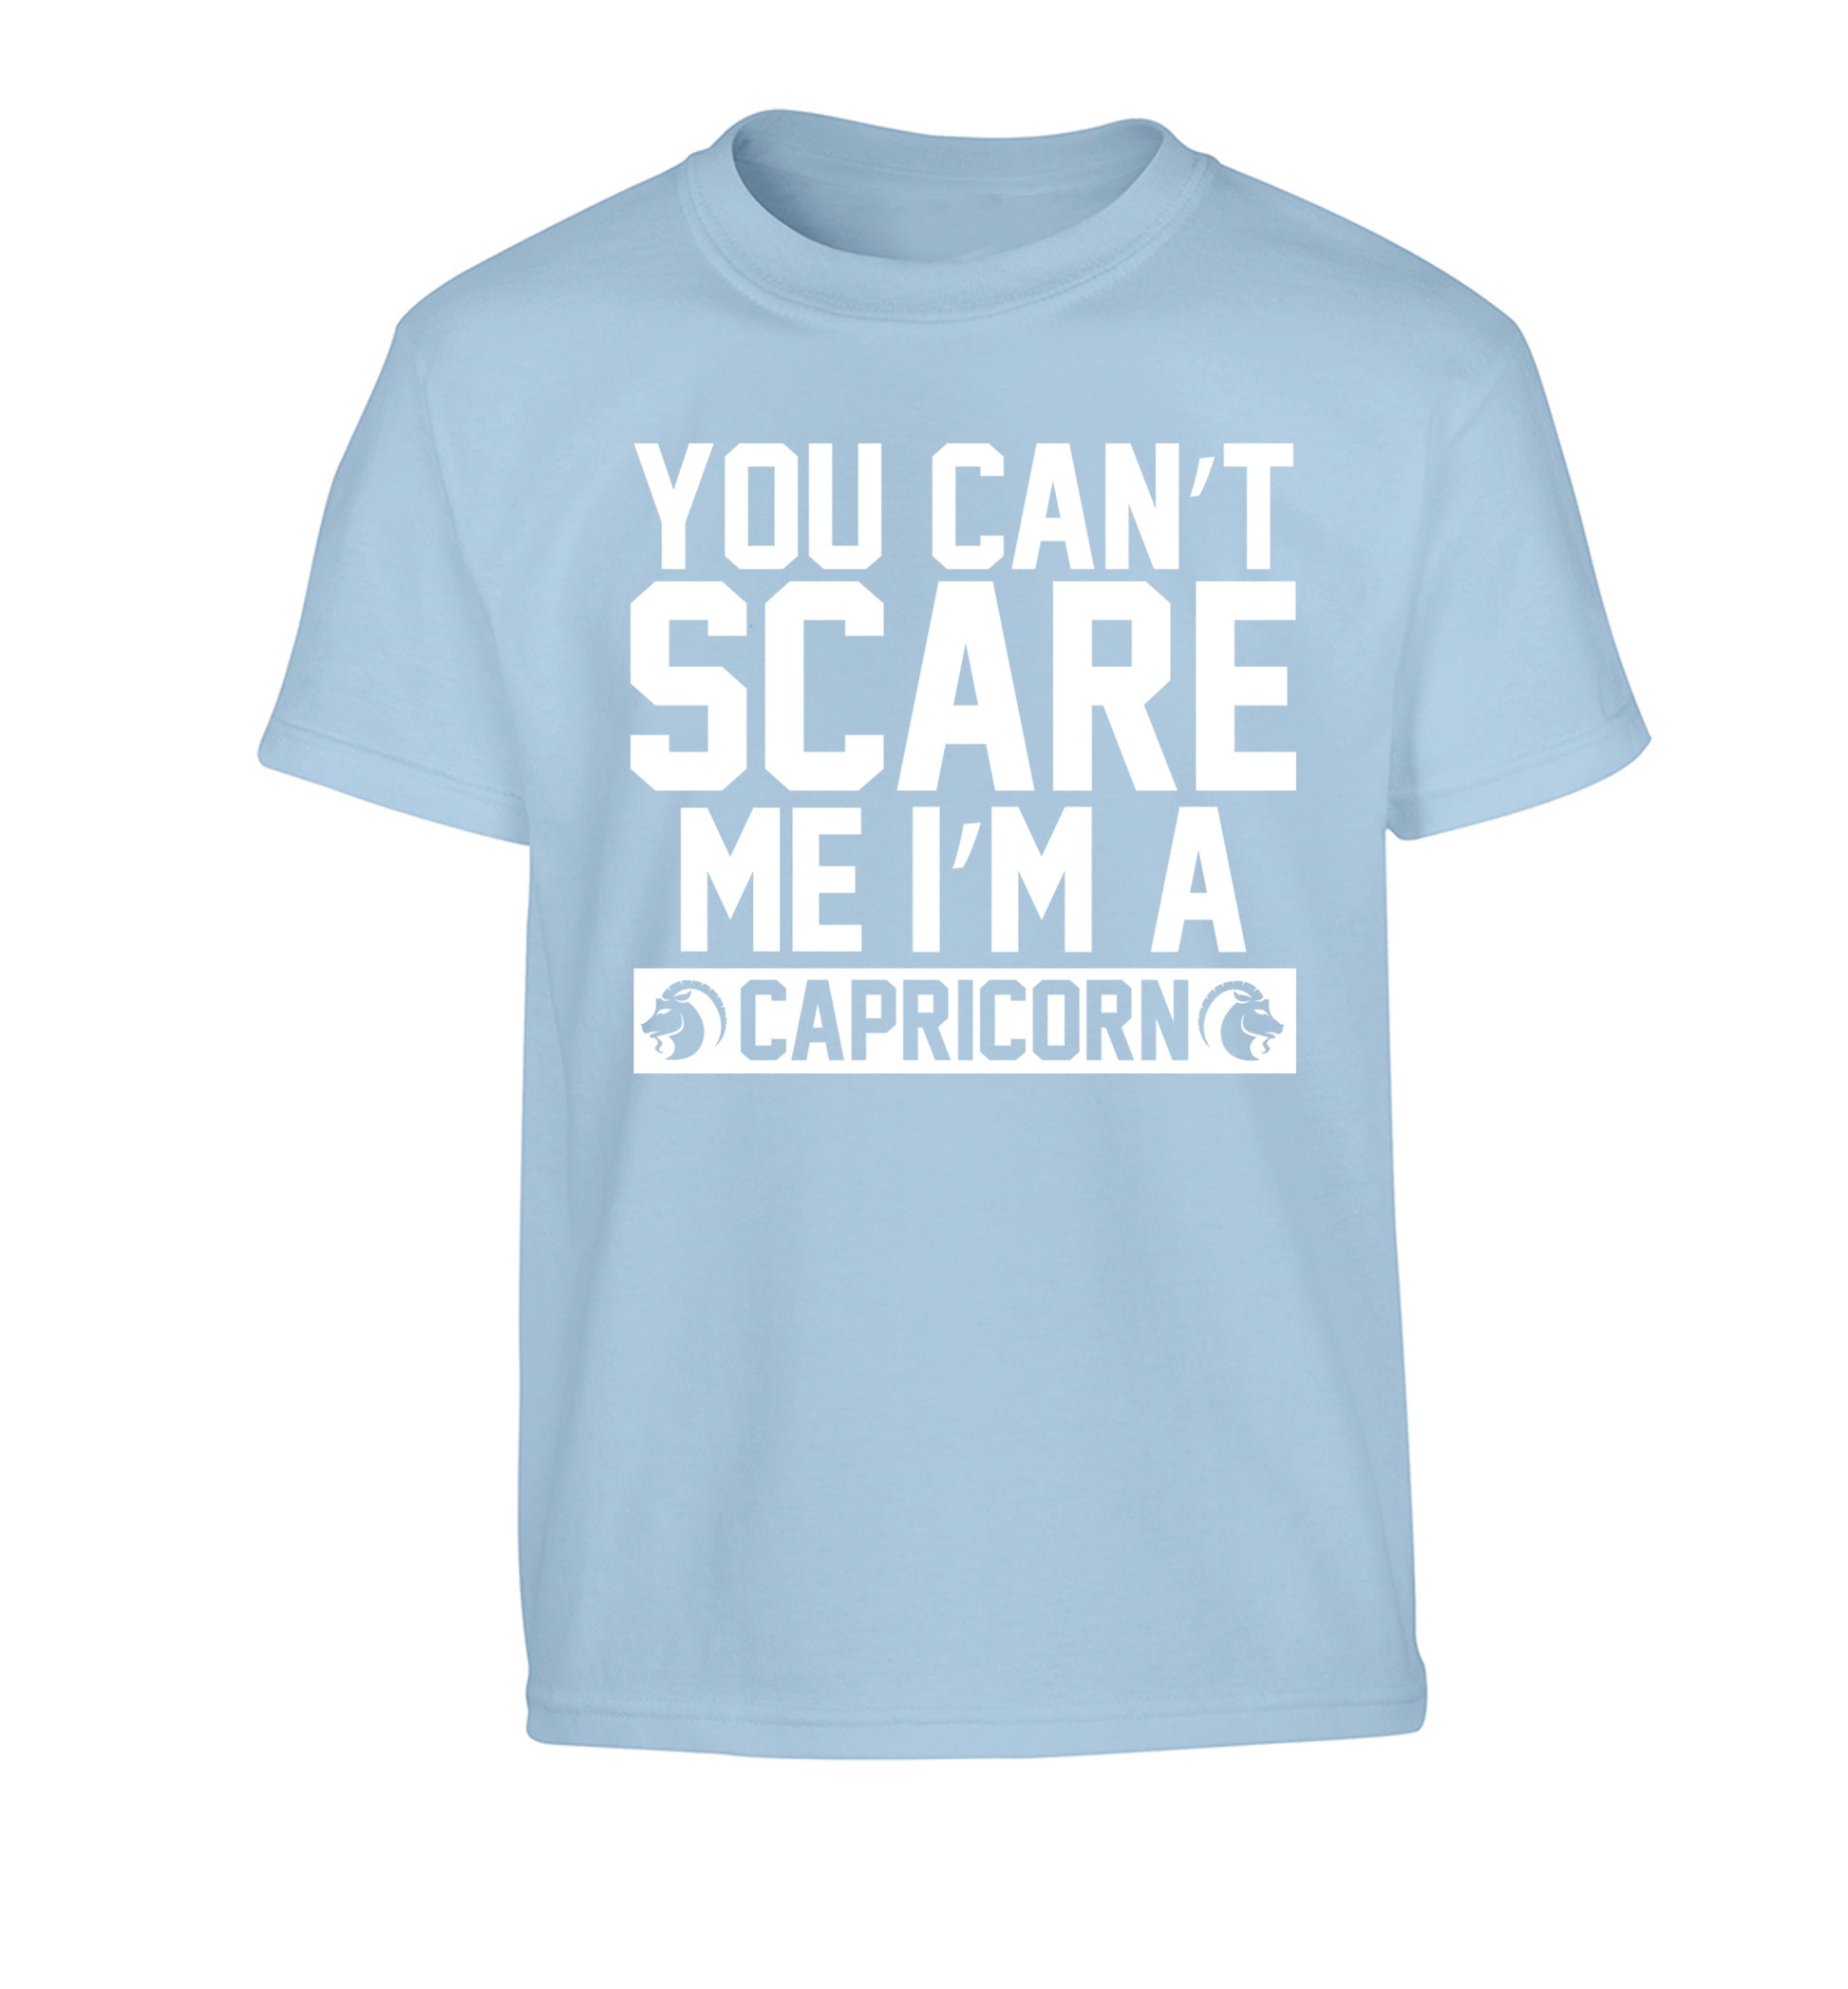 You can't scare me I'm a capricorn Children's light blue Tshirt 12-13 Years